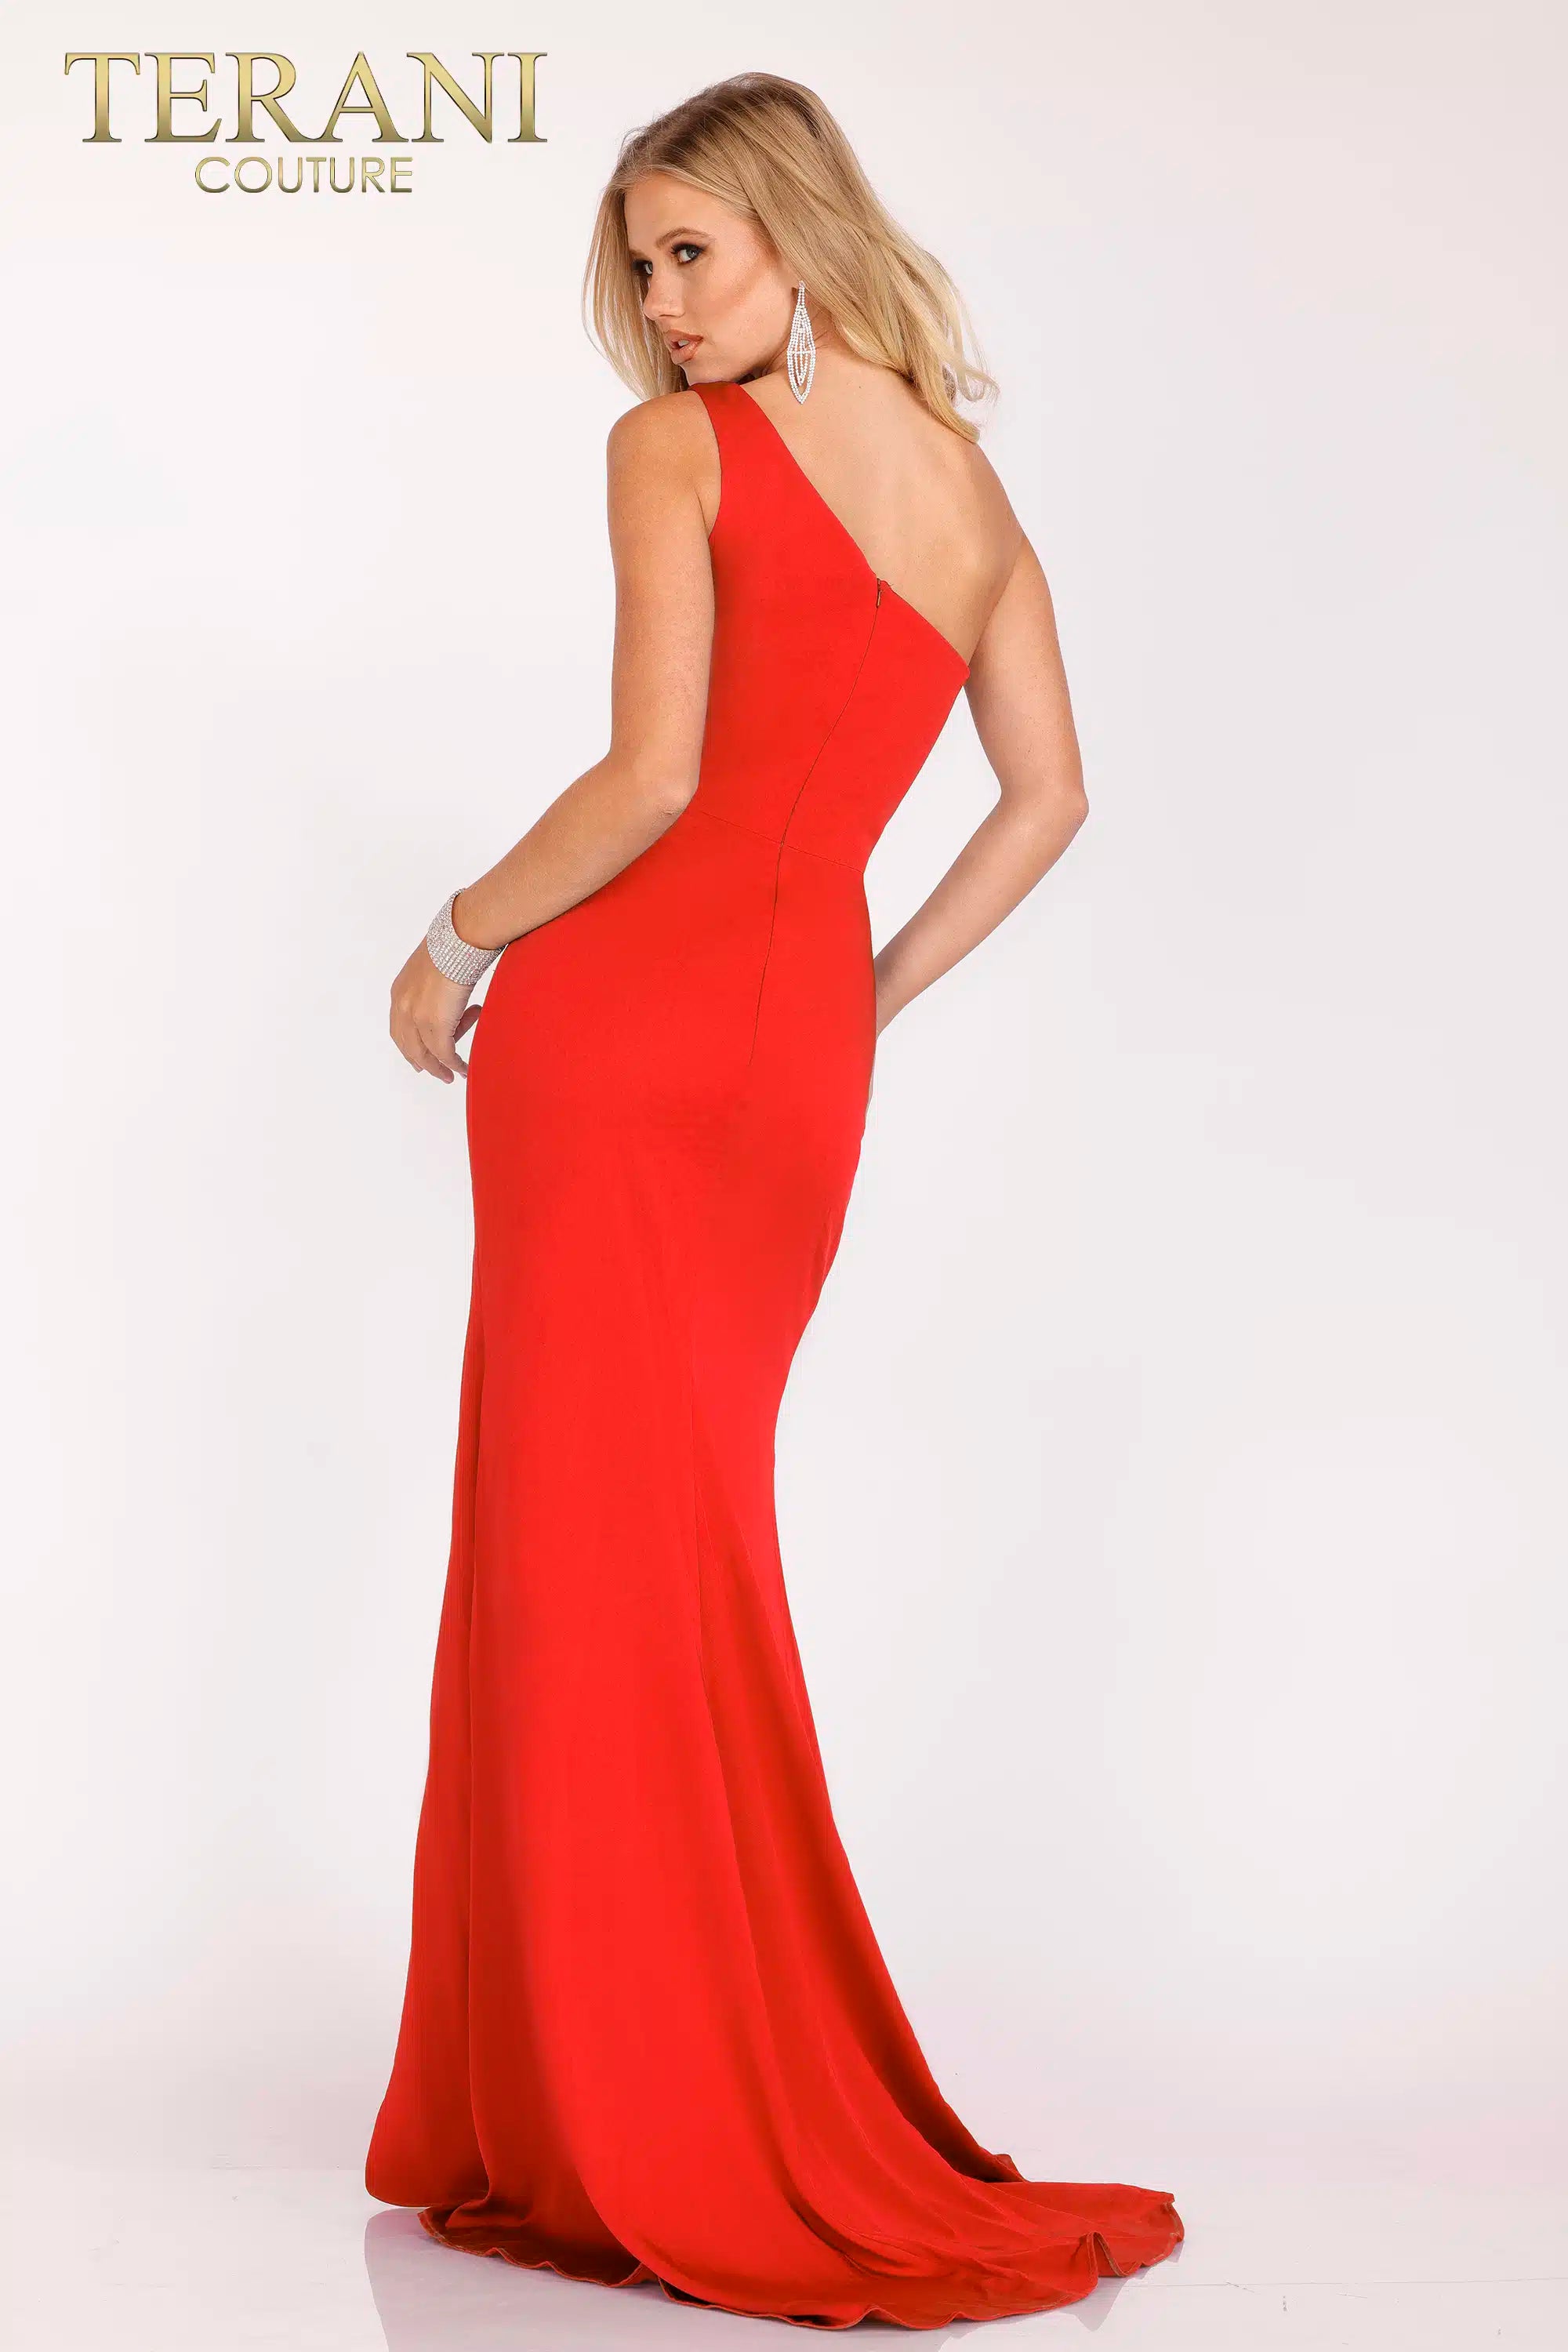 Welcome to WWW.SWANDRESSES.COM, your destination for authentic designer dresses. Discover our Elegant Maxi, Classic Cocktail, Sophisticated Sheath, Glamorous Mermaid, Timeless A-Line, Romantic Lace, Off-the-Shoulder, and High-Low Dresses. Perfect for weddings, galas, proms, and special occasions. Elevate your style 